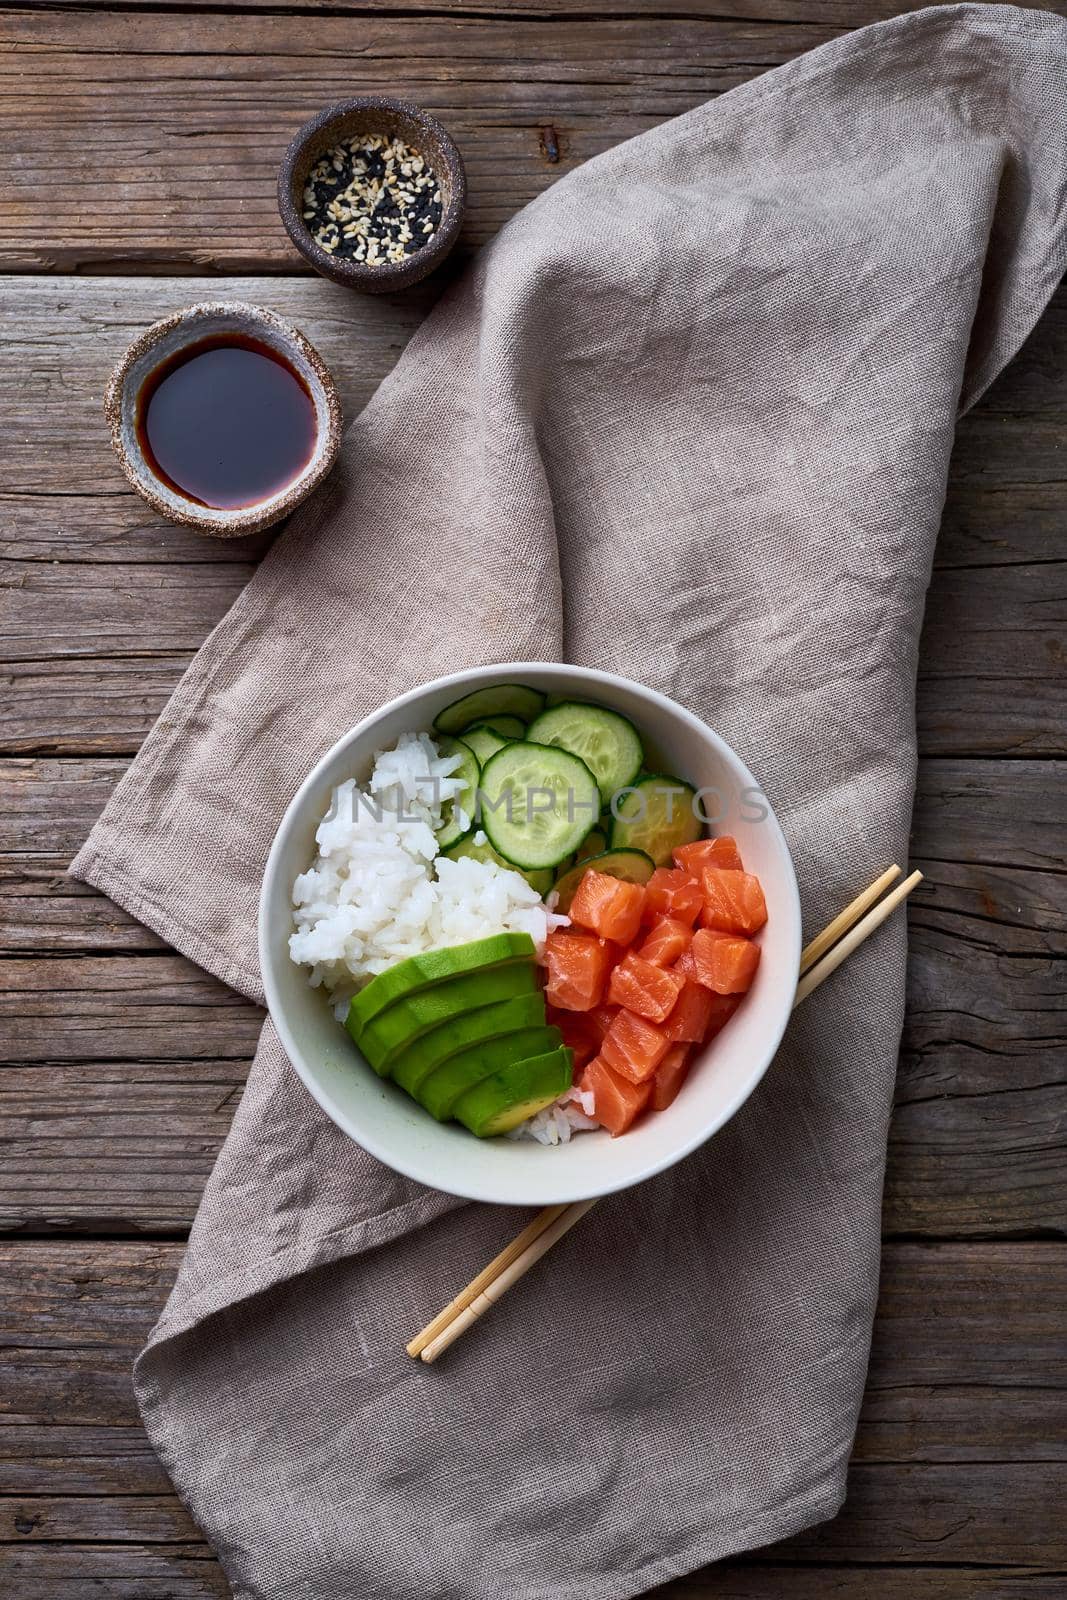 salmon poke bowl with fresh fish, rice, cucumber, avocado with black and white sesame. Food concept, top view, vertical